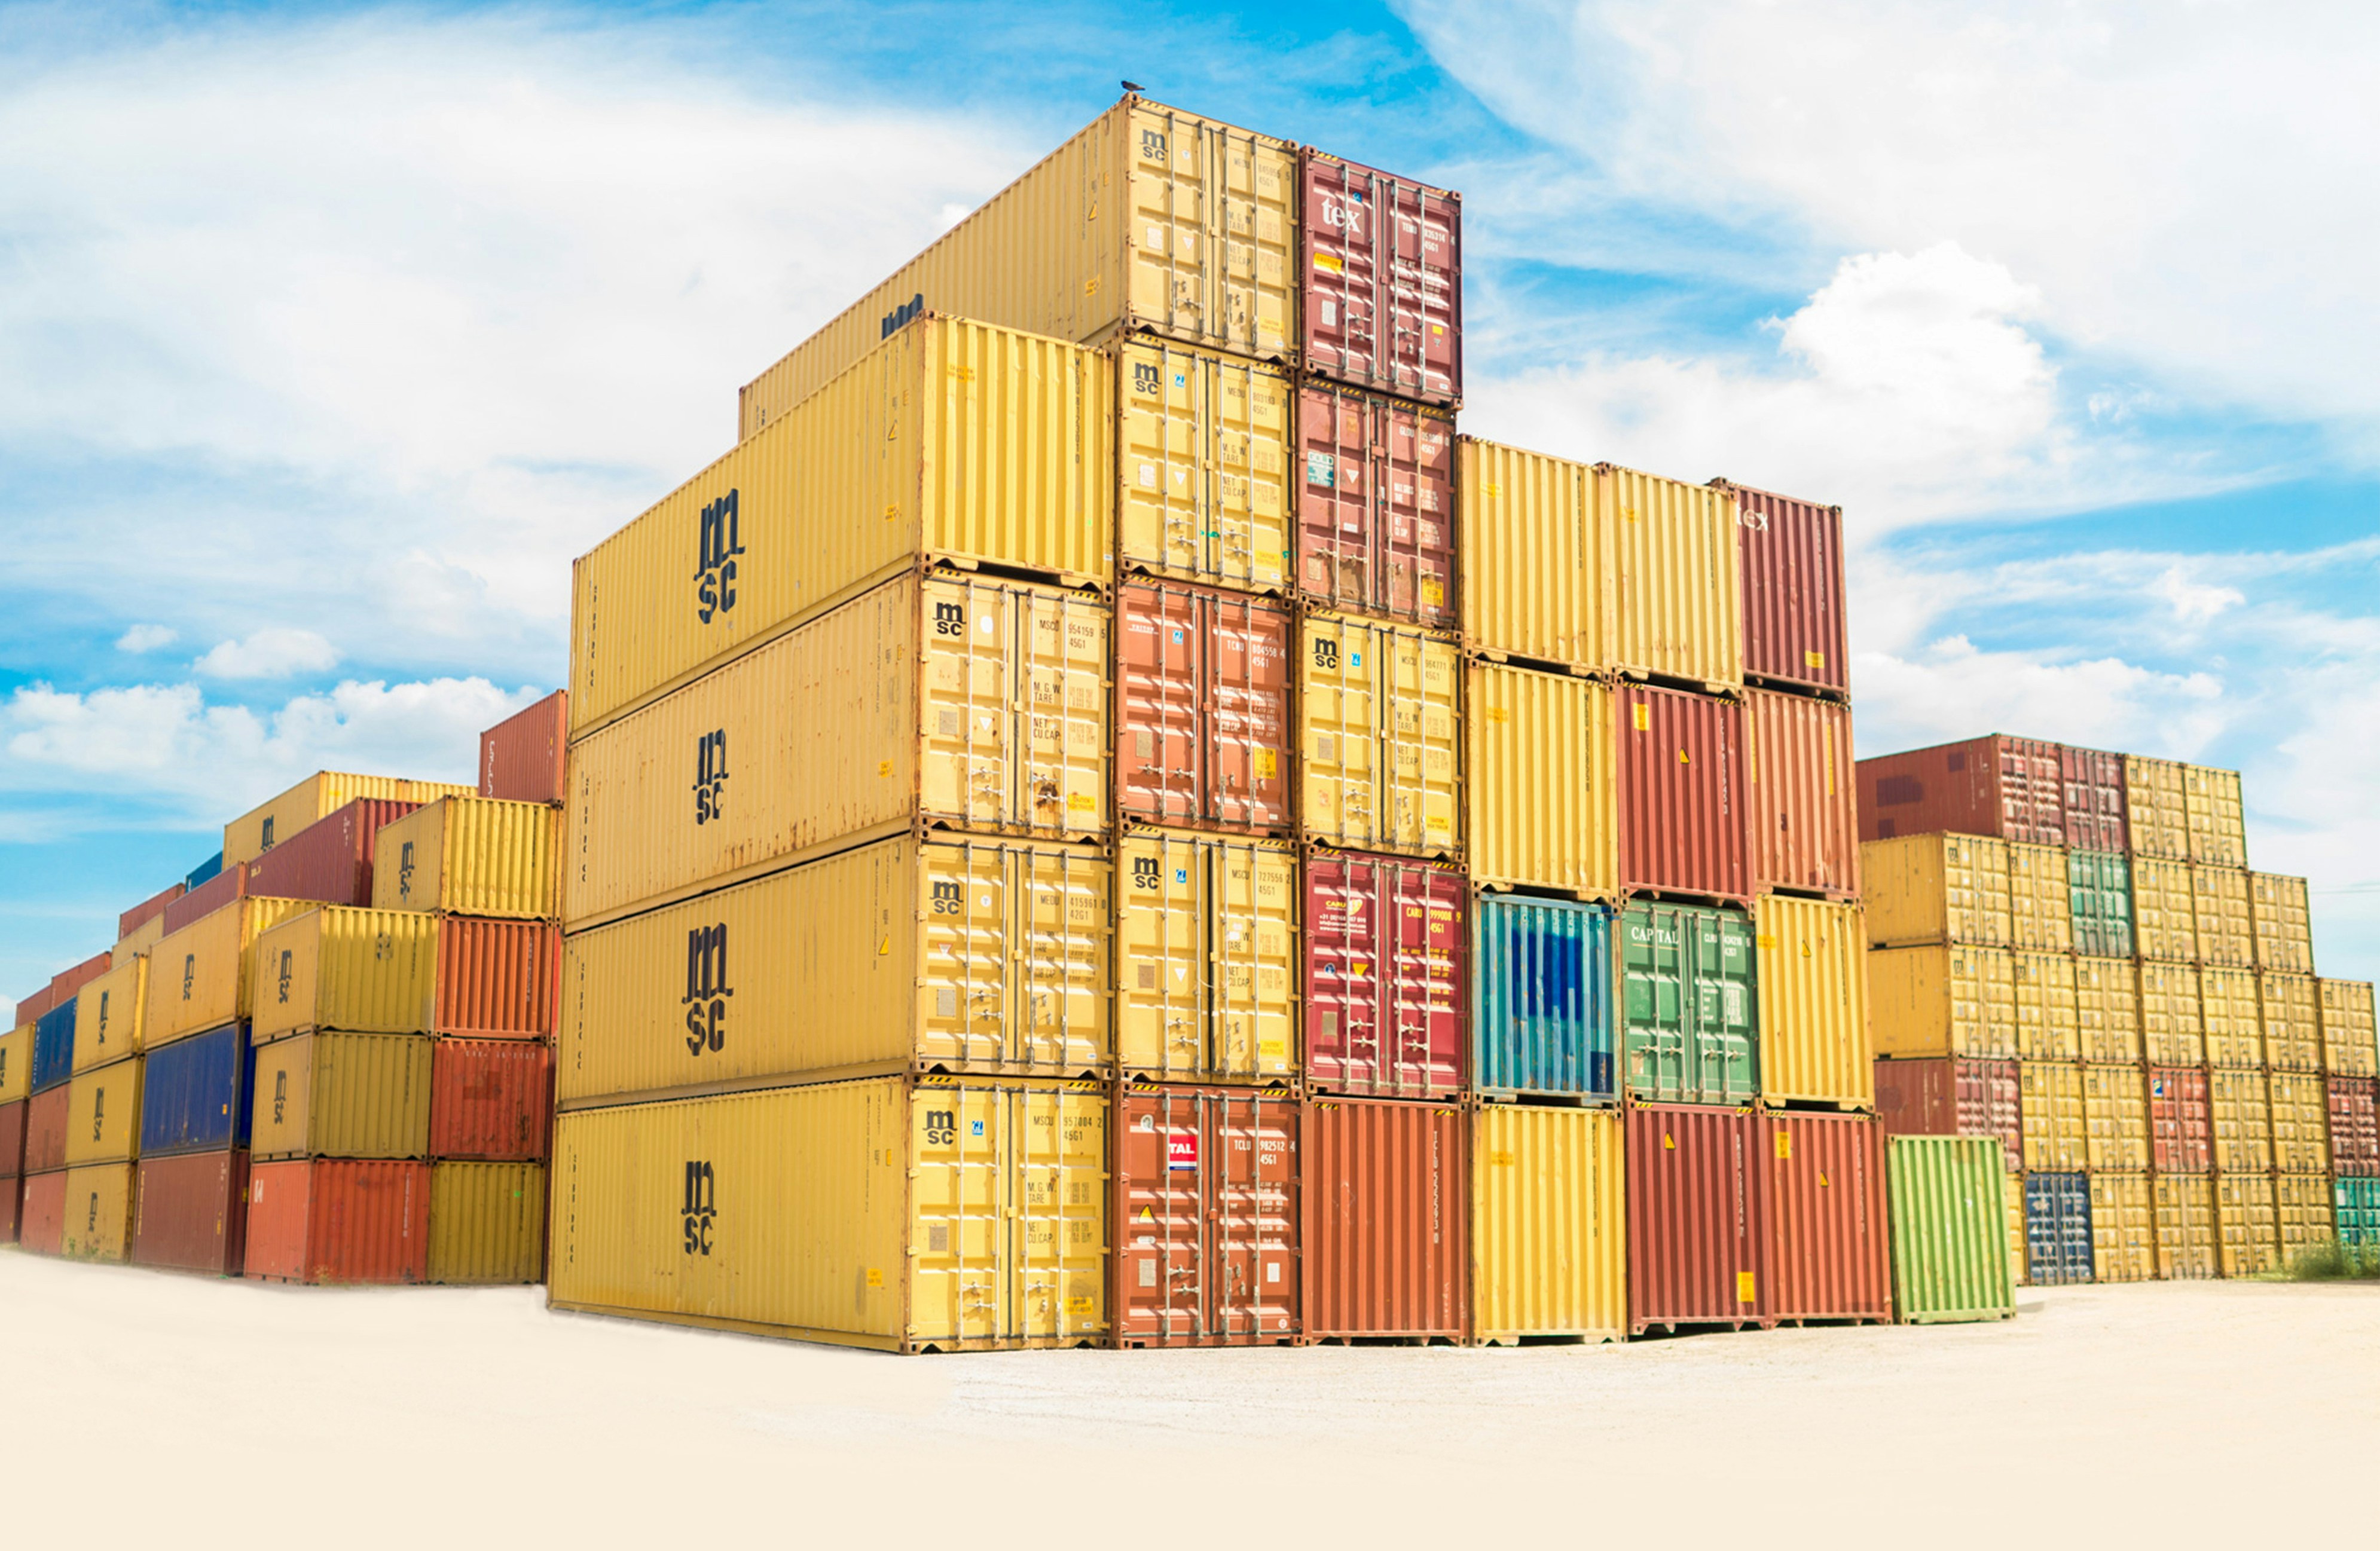 Revolutionizing Logistics: The Container Loading and Unloading System